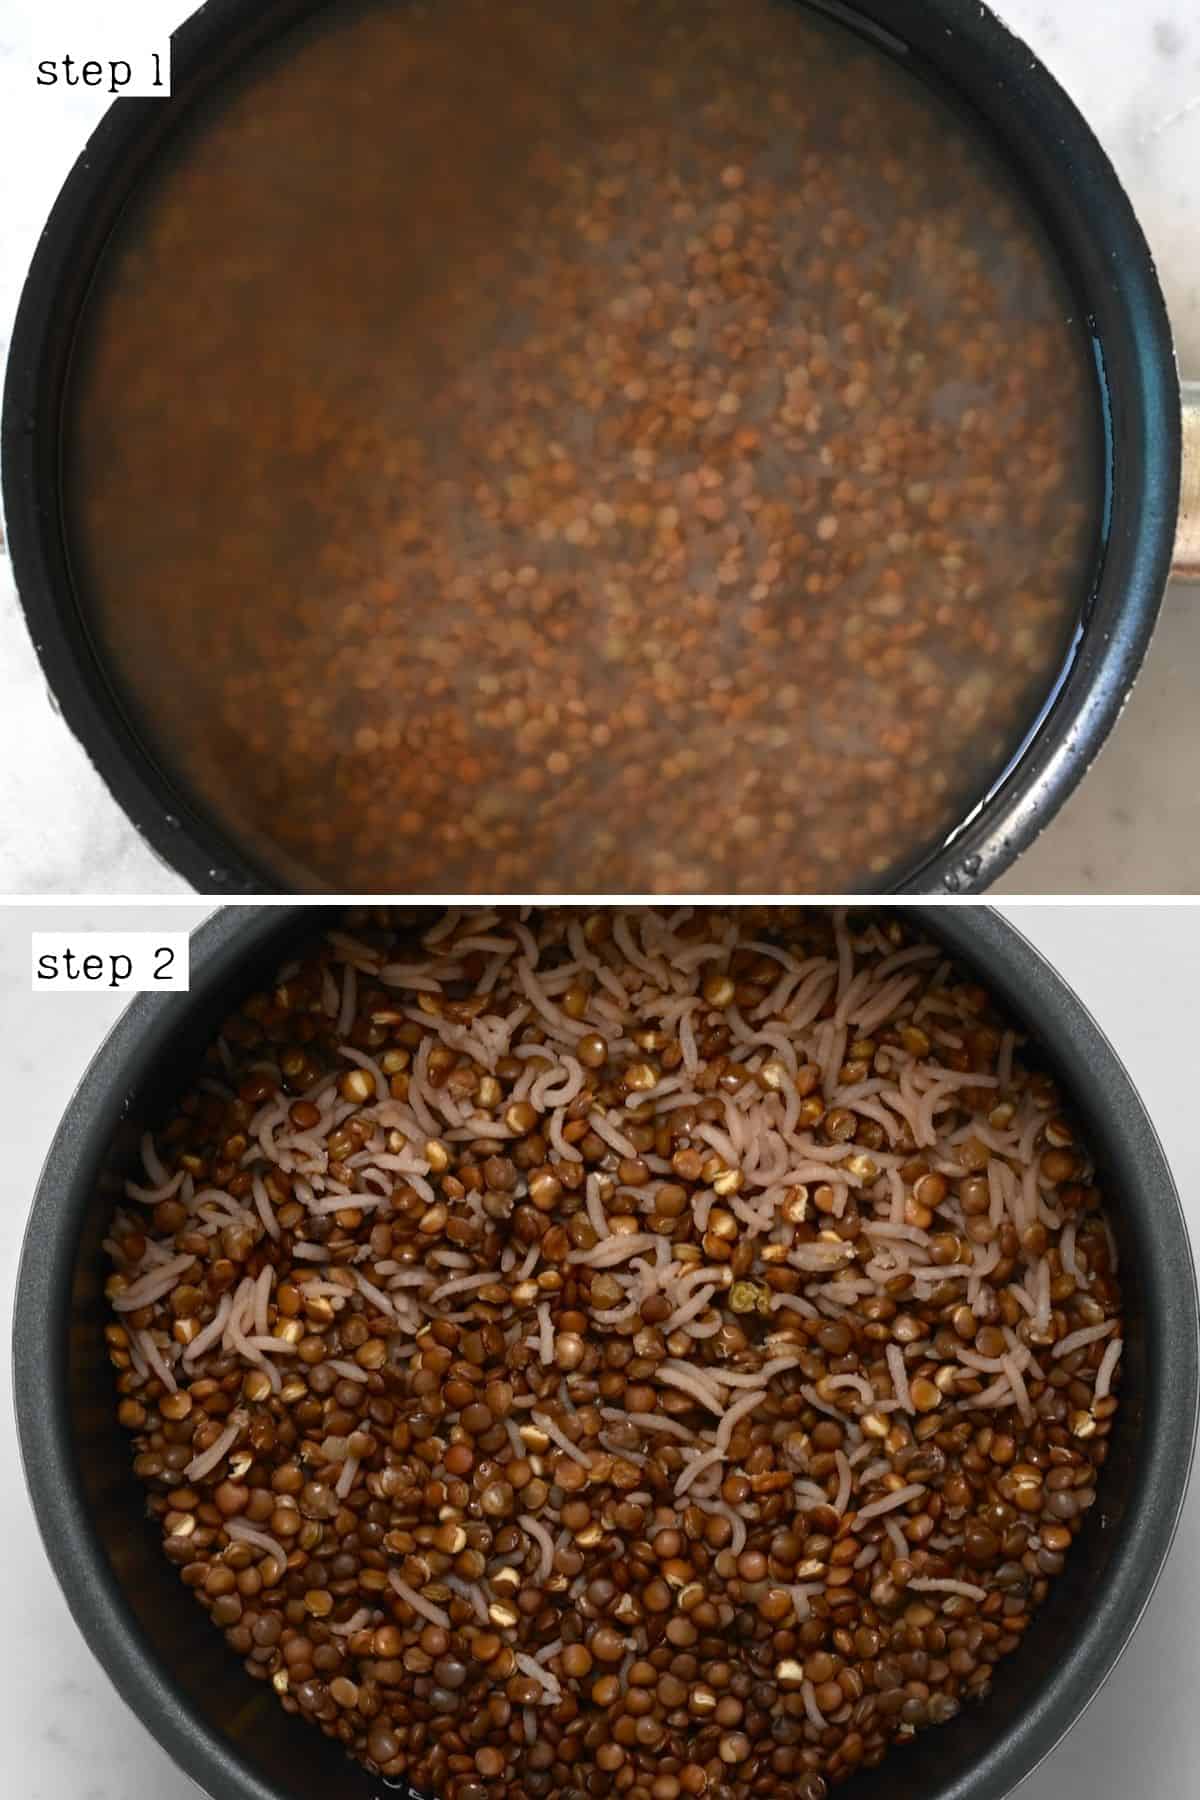 Steps for preparing lentils and rice